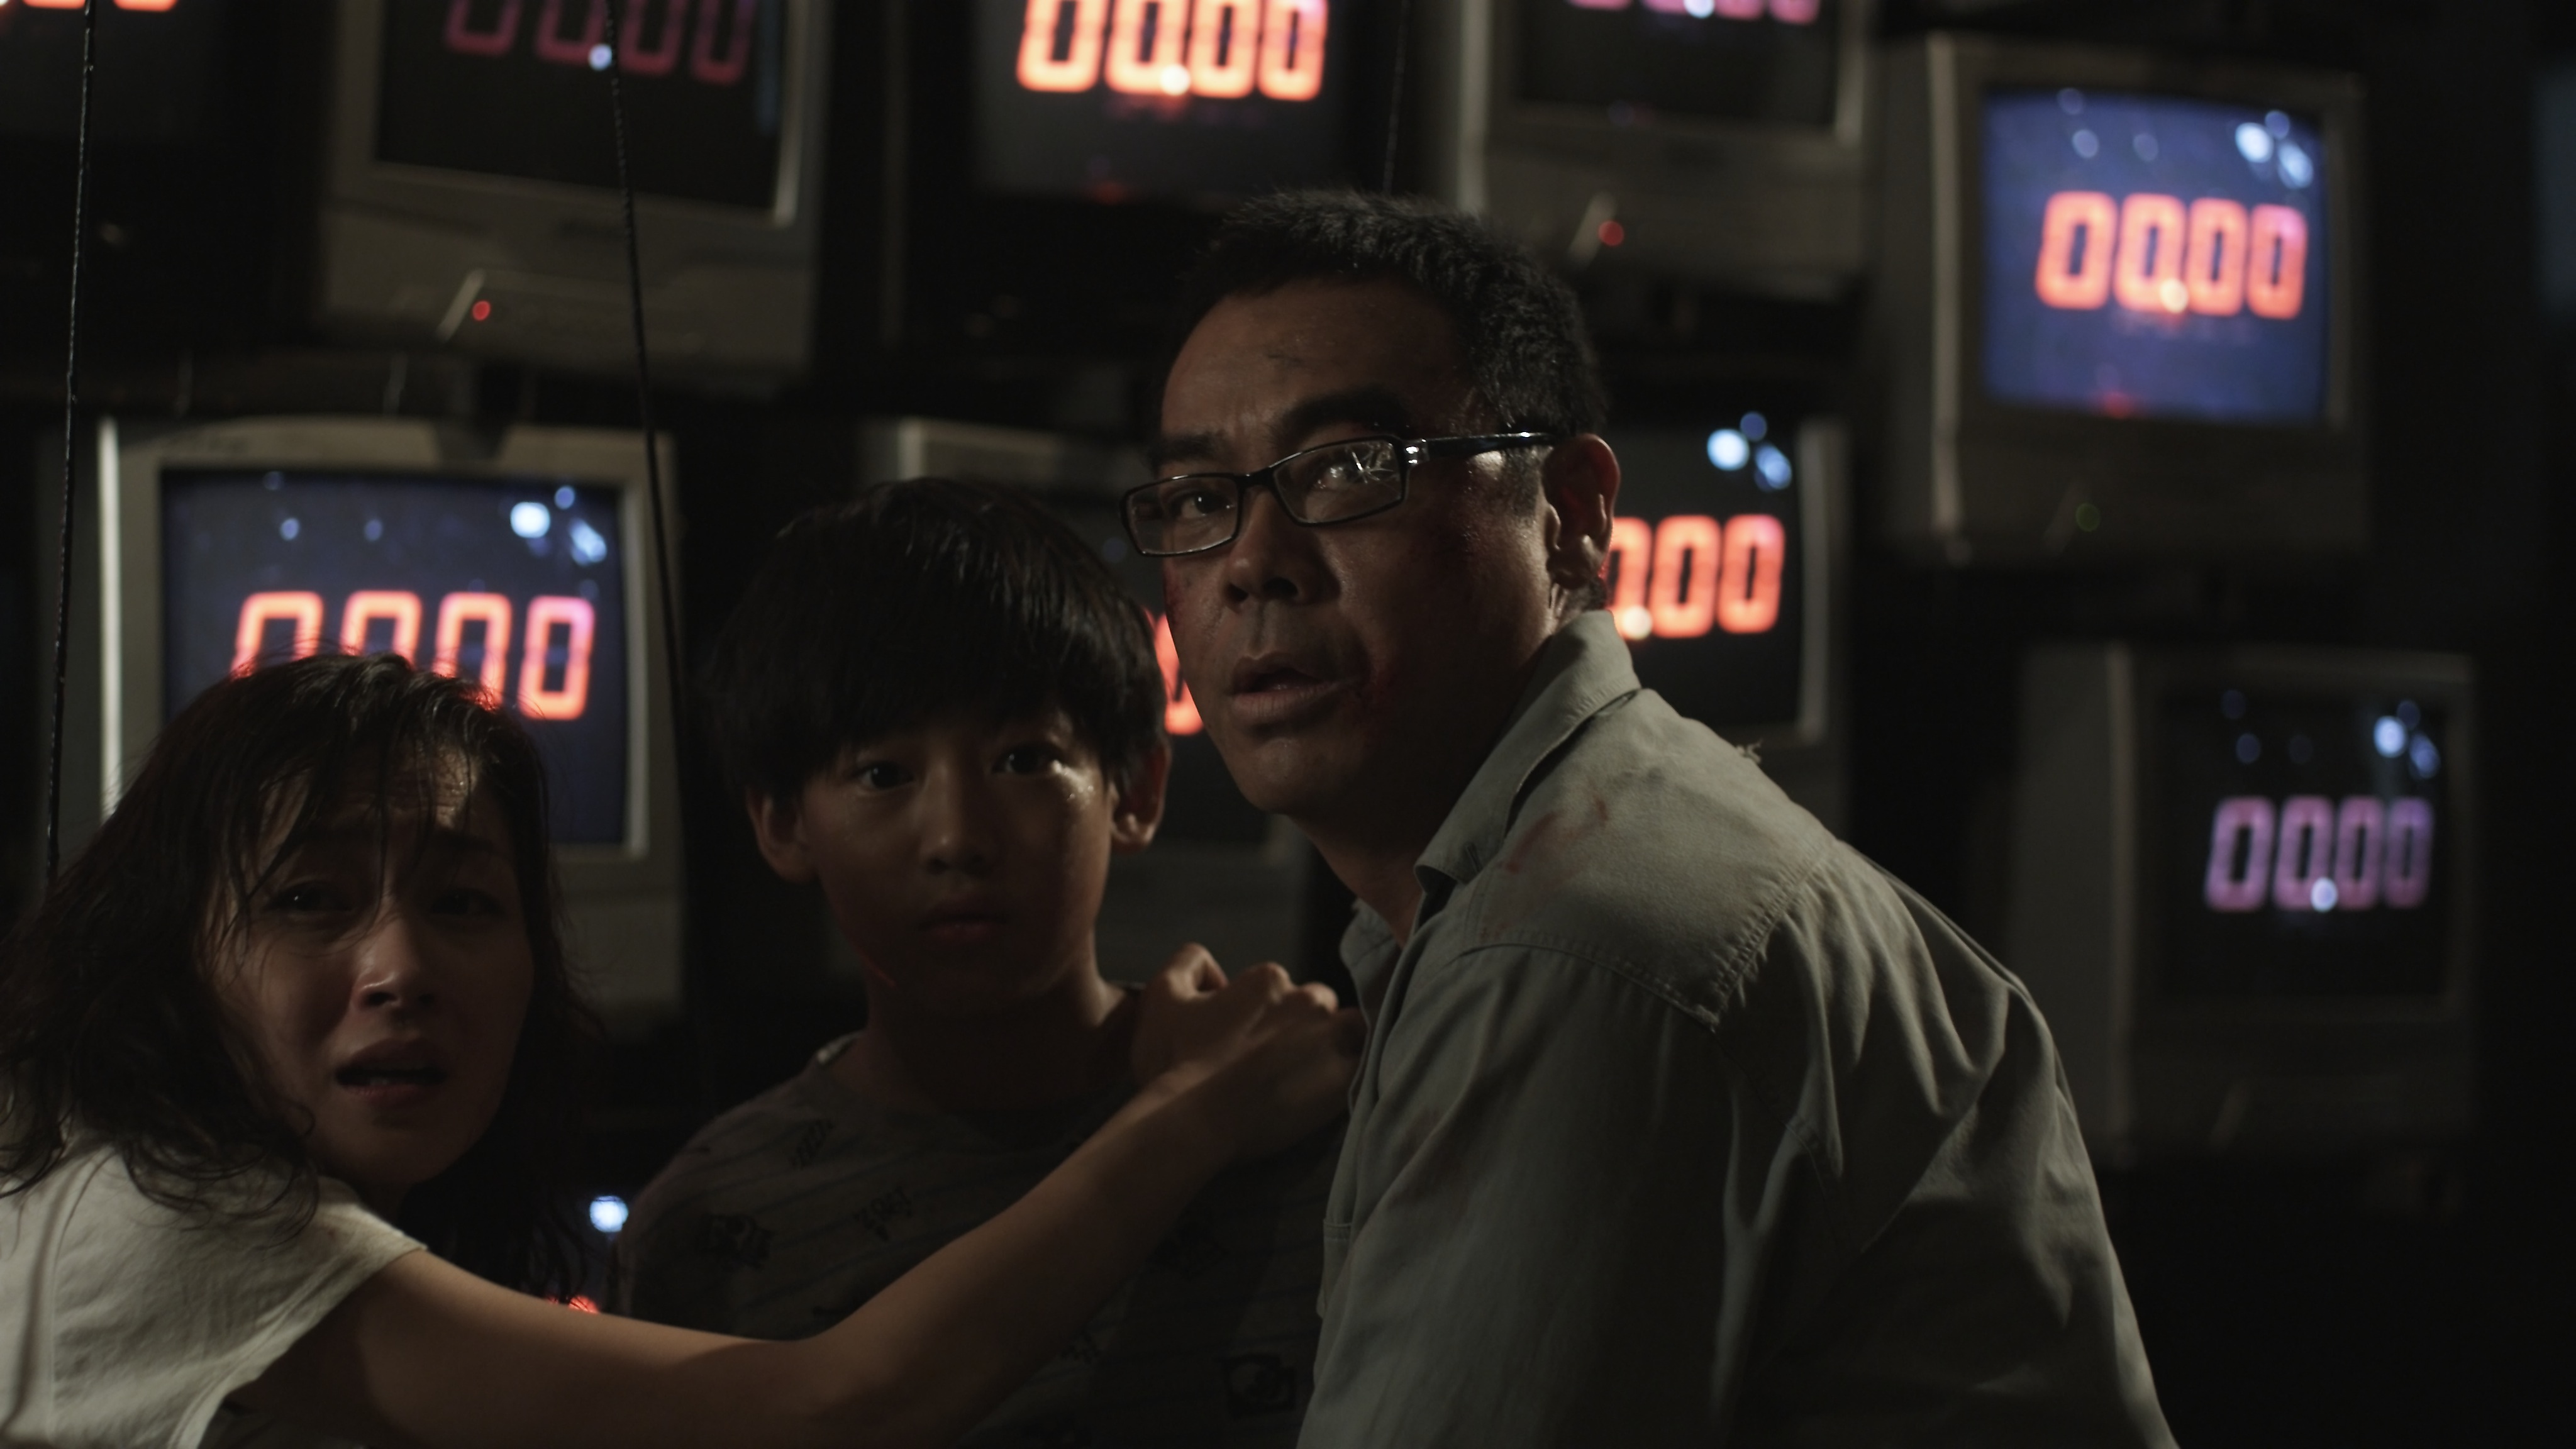 Still of Ching Wan Lau and Yee-Man Man in Zui hung (2012)